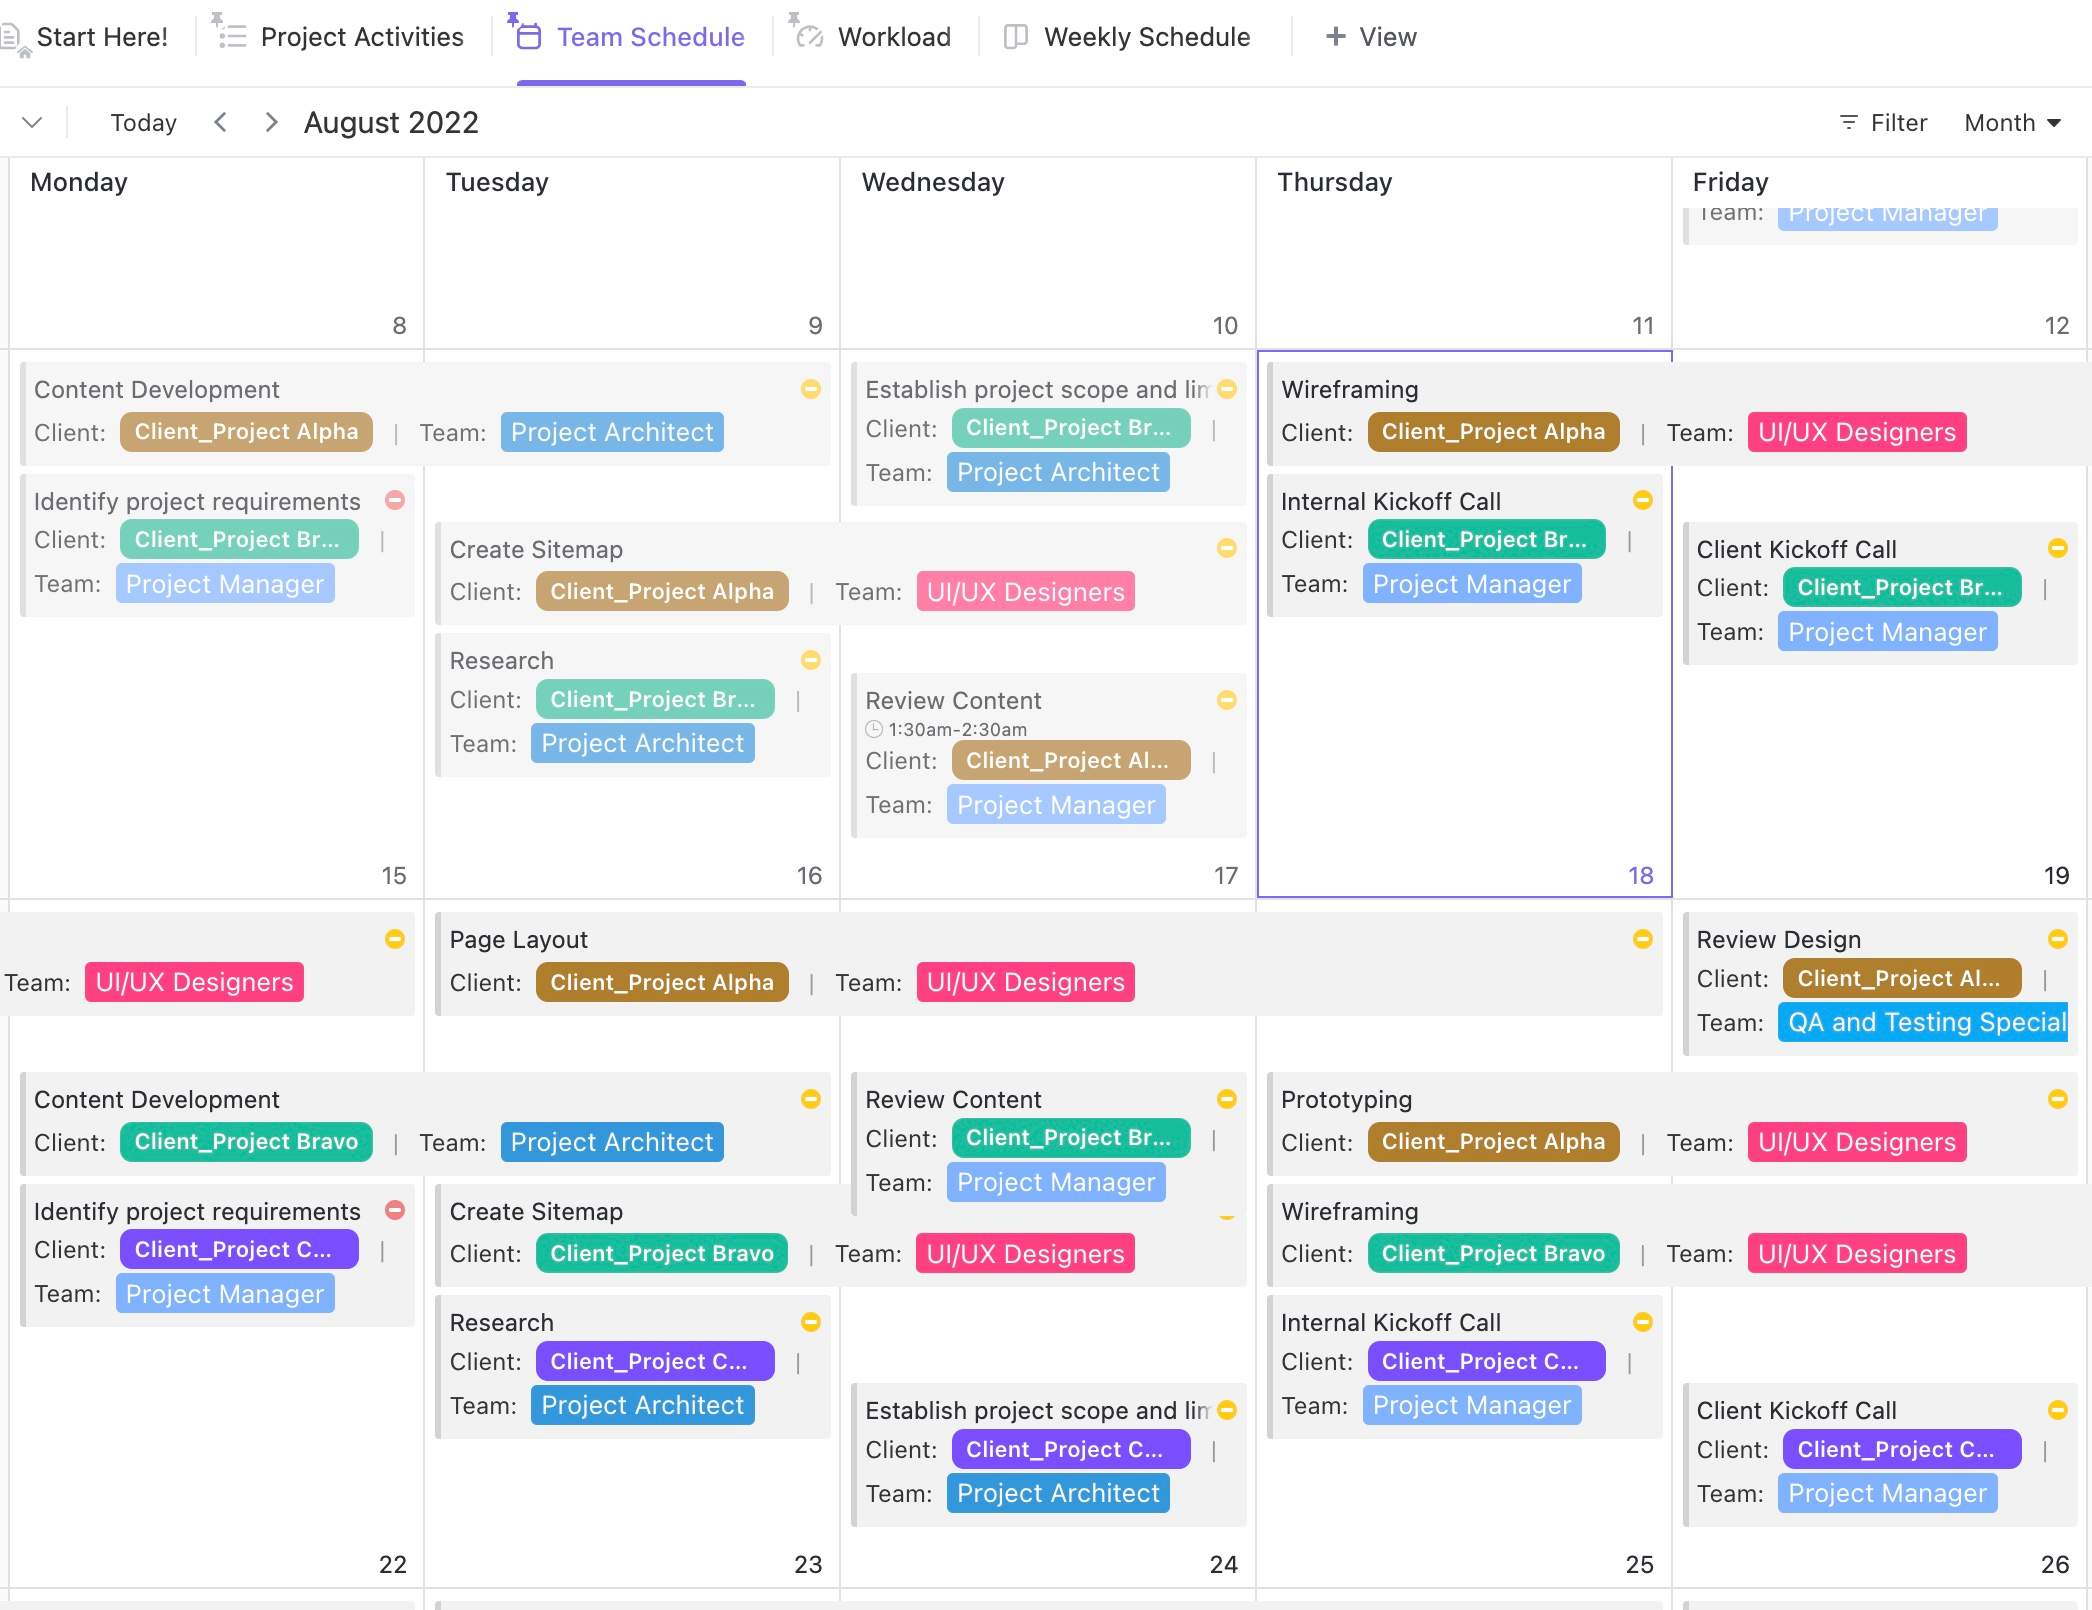 Want to see your team members' schedules? This team schedule template is for you! Listing down tasks and grouping them per team member is made easier and more interactive using different views with this template.